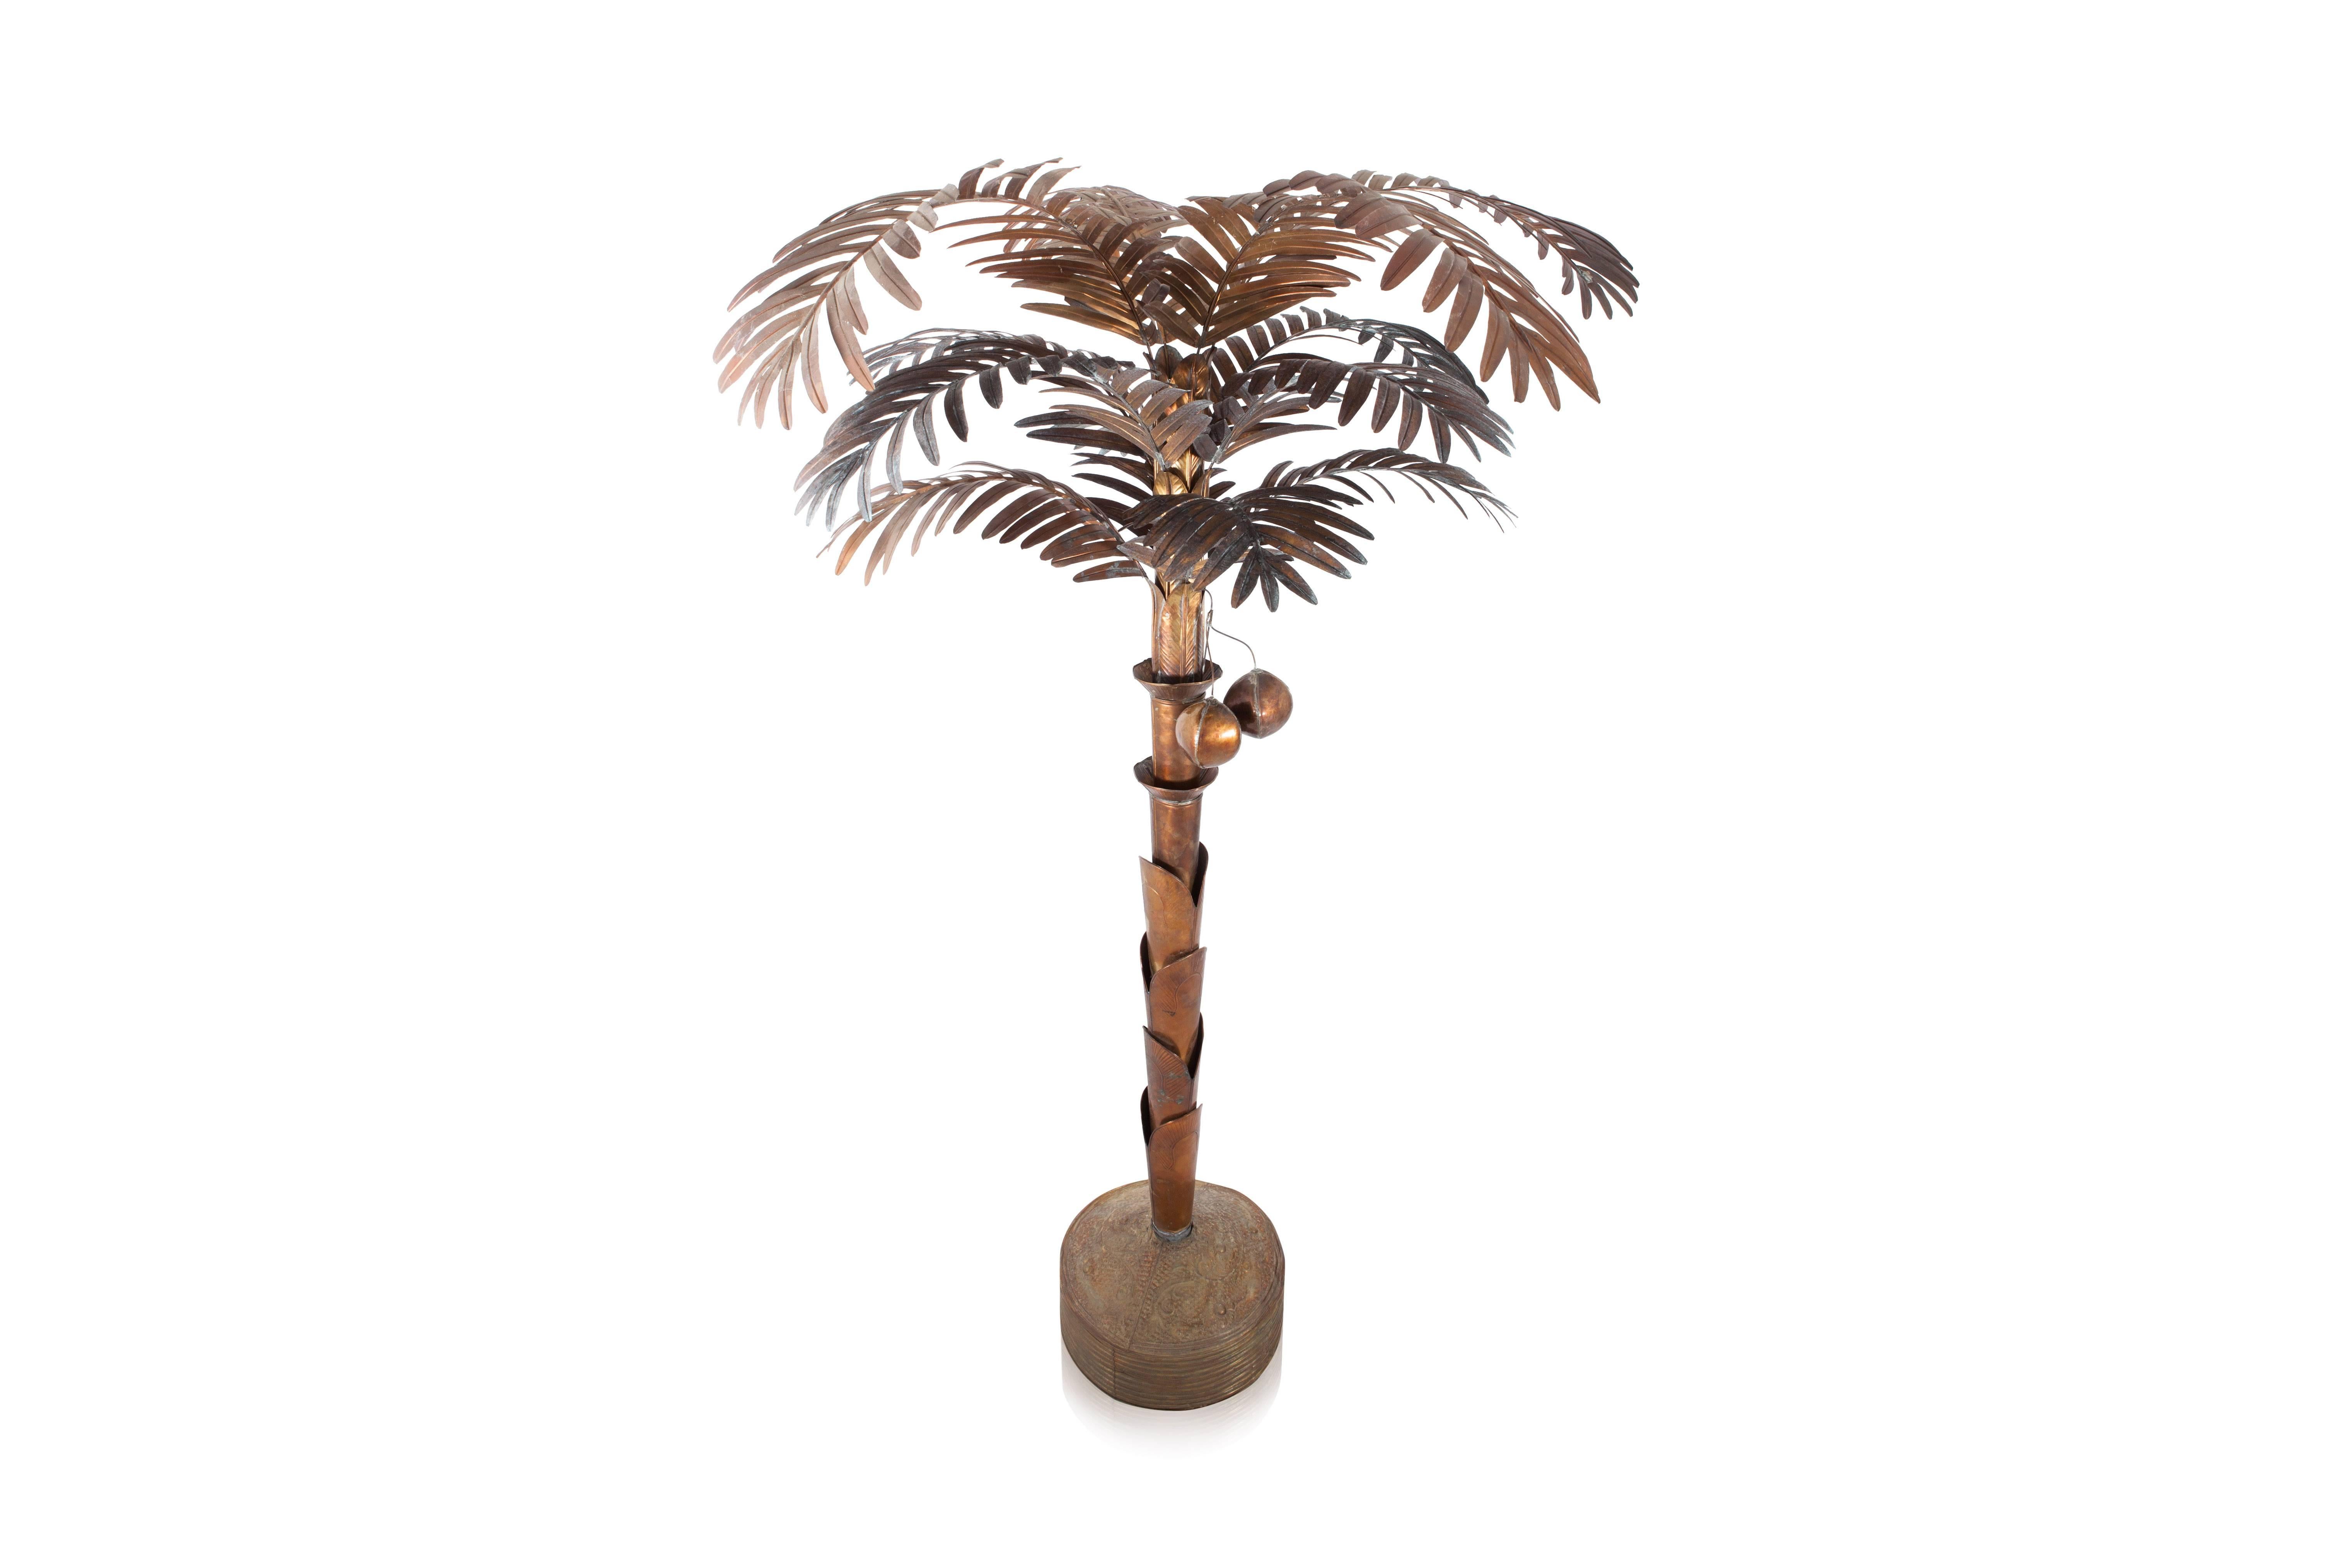 Super cool brass palm tree floor lamp.
Coconuts hide the lights.
Awesome patina.
1980s Continental Europe.
Old stock discovery.
Measures: H 210 cm, Ø 130 cm.